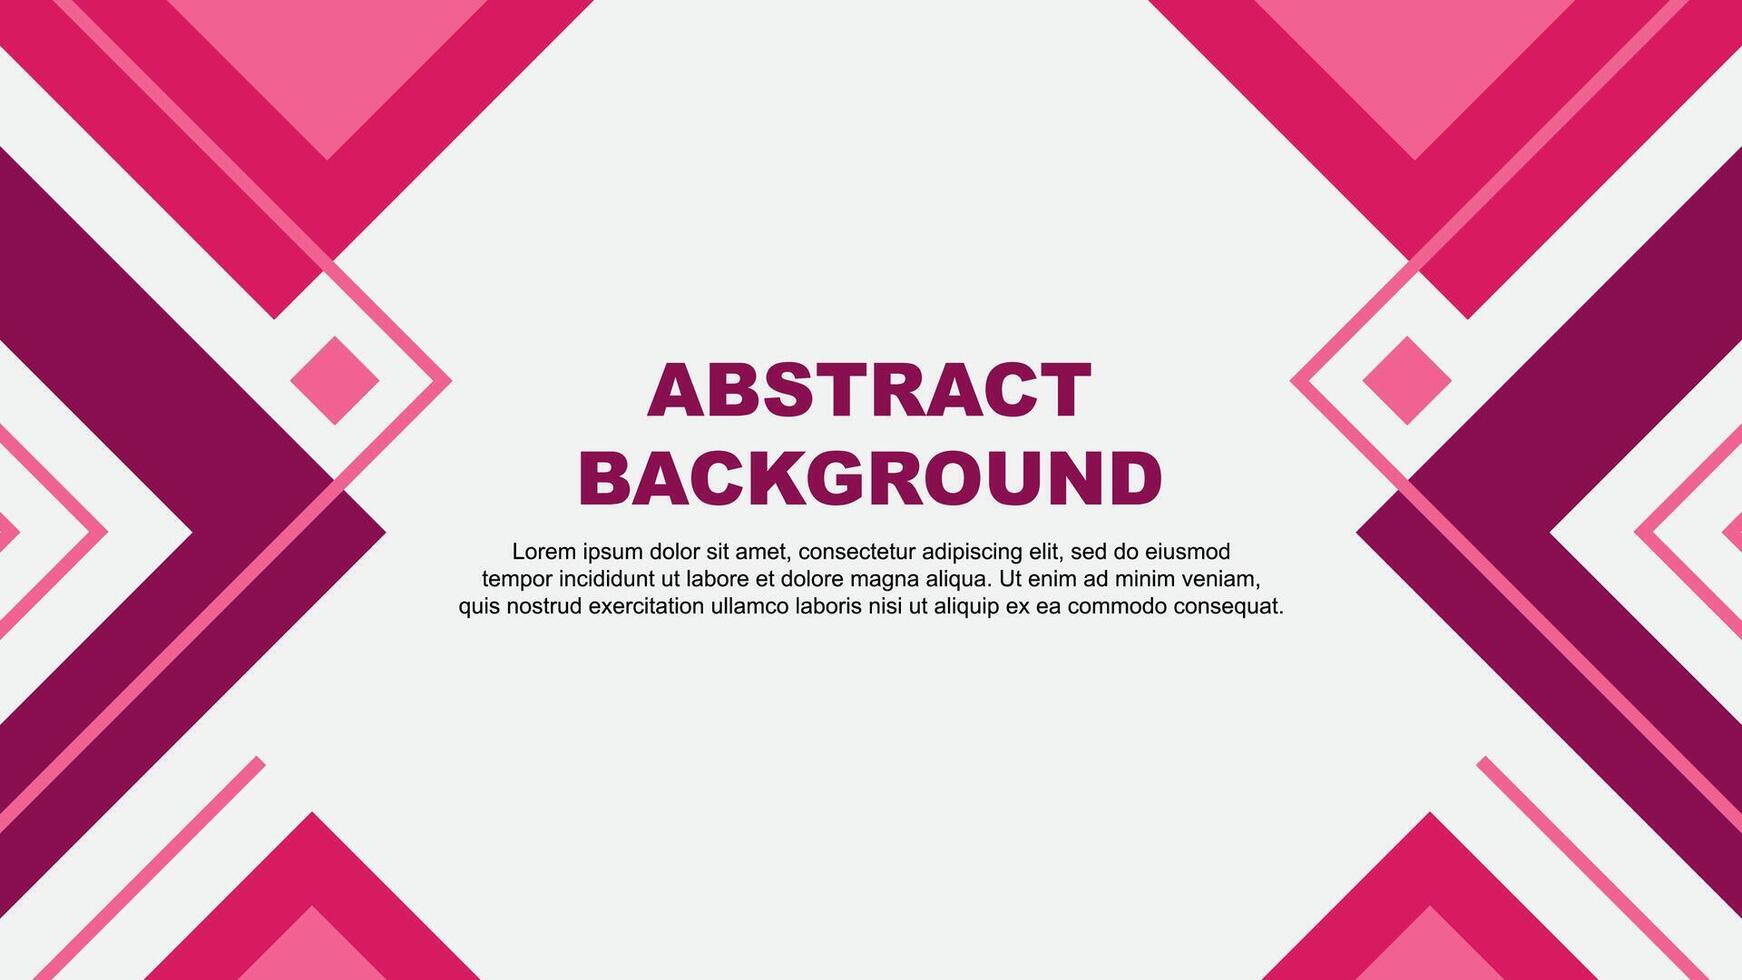 Abstract Pink Background Design Template. Abstract Banner Wallpaper Illustration. Abstract Pink Illustration vector